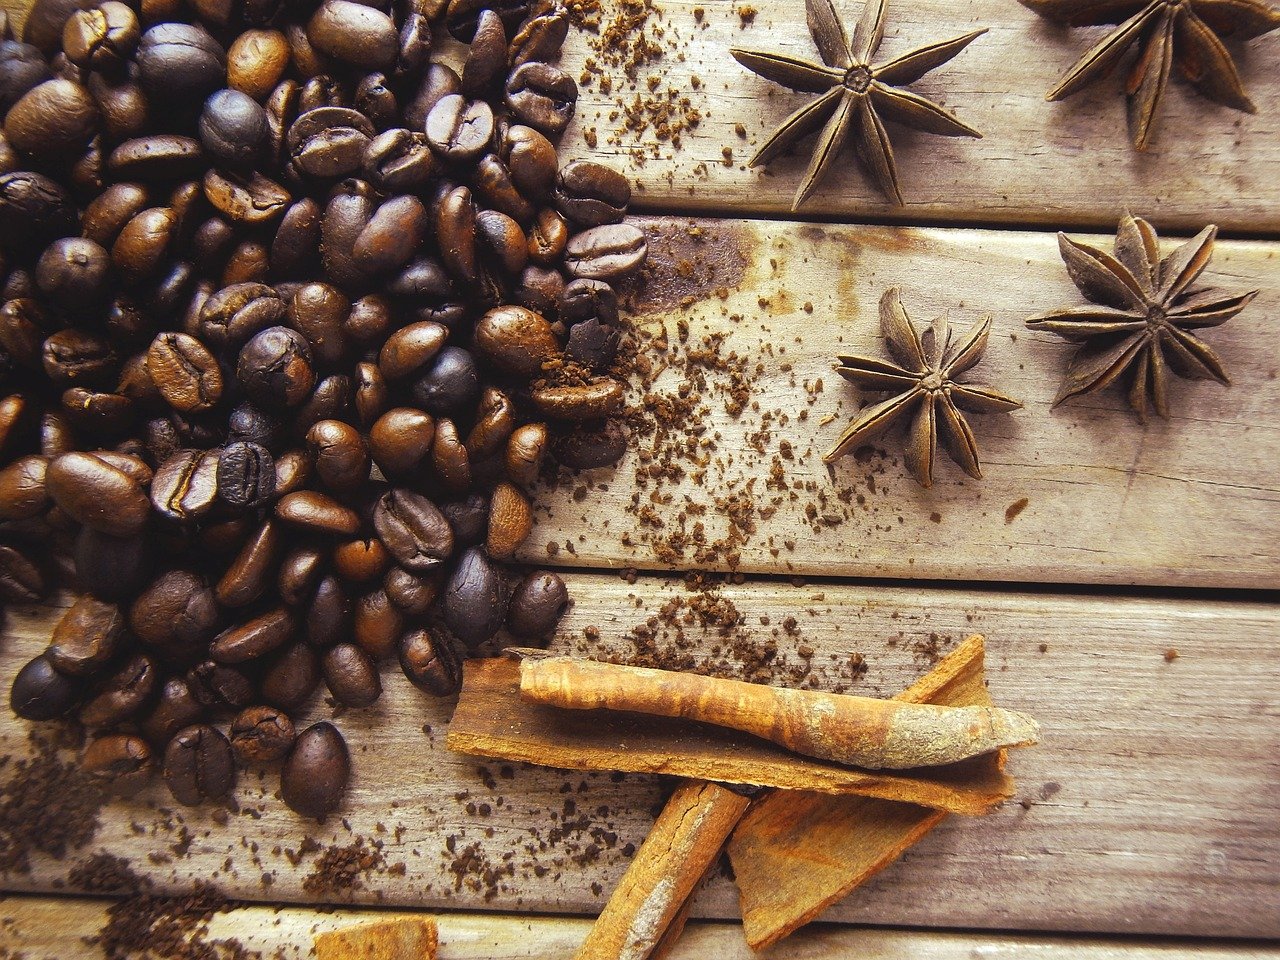 A Step-by-Step Guide to Making Chocolate Covered Coffee Beans